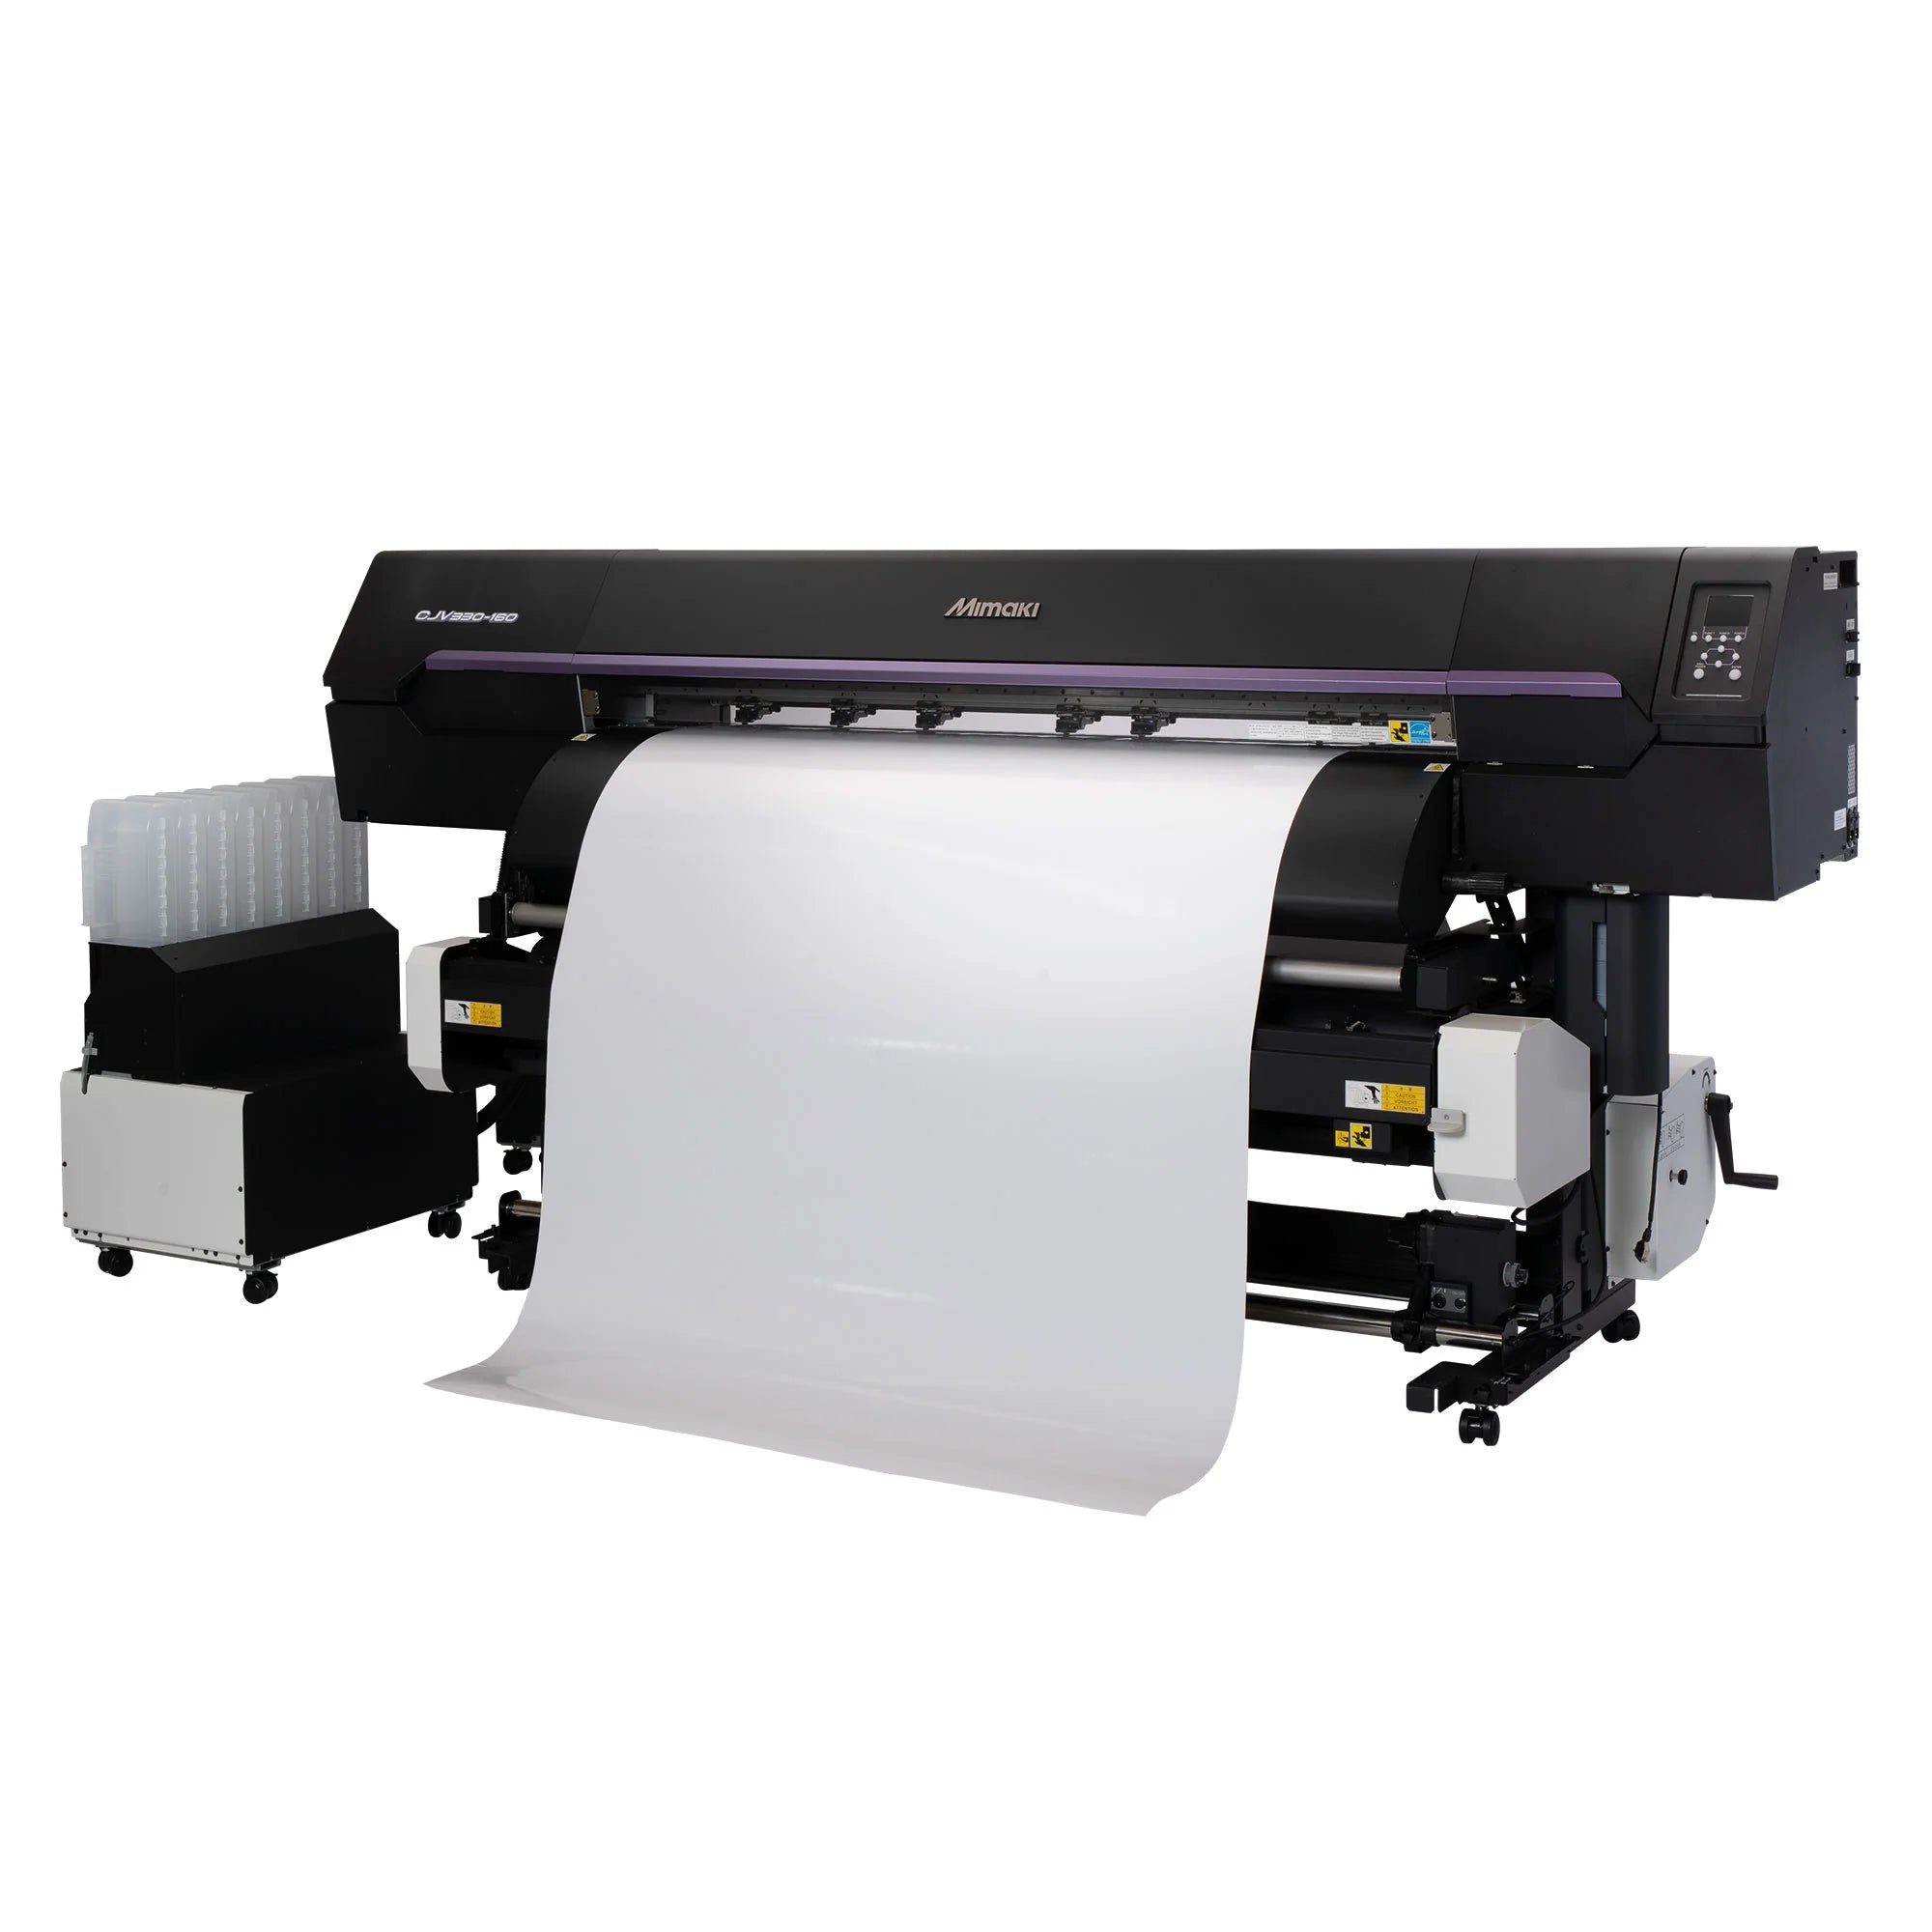 Absolute Toner Brand New Mimaki CJV330-160 64" Inch Commercial Wide Format Production Printer and Cutting Plotter Print and Cut Plotters